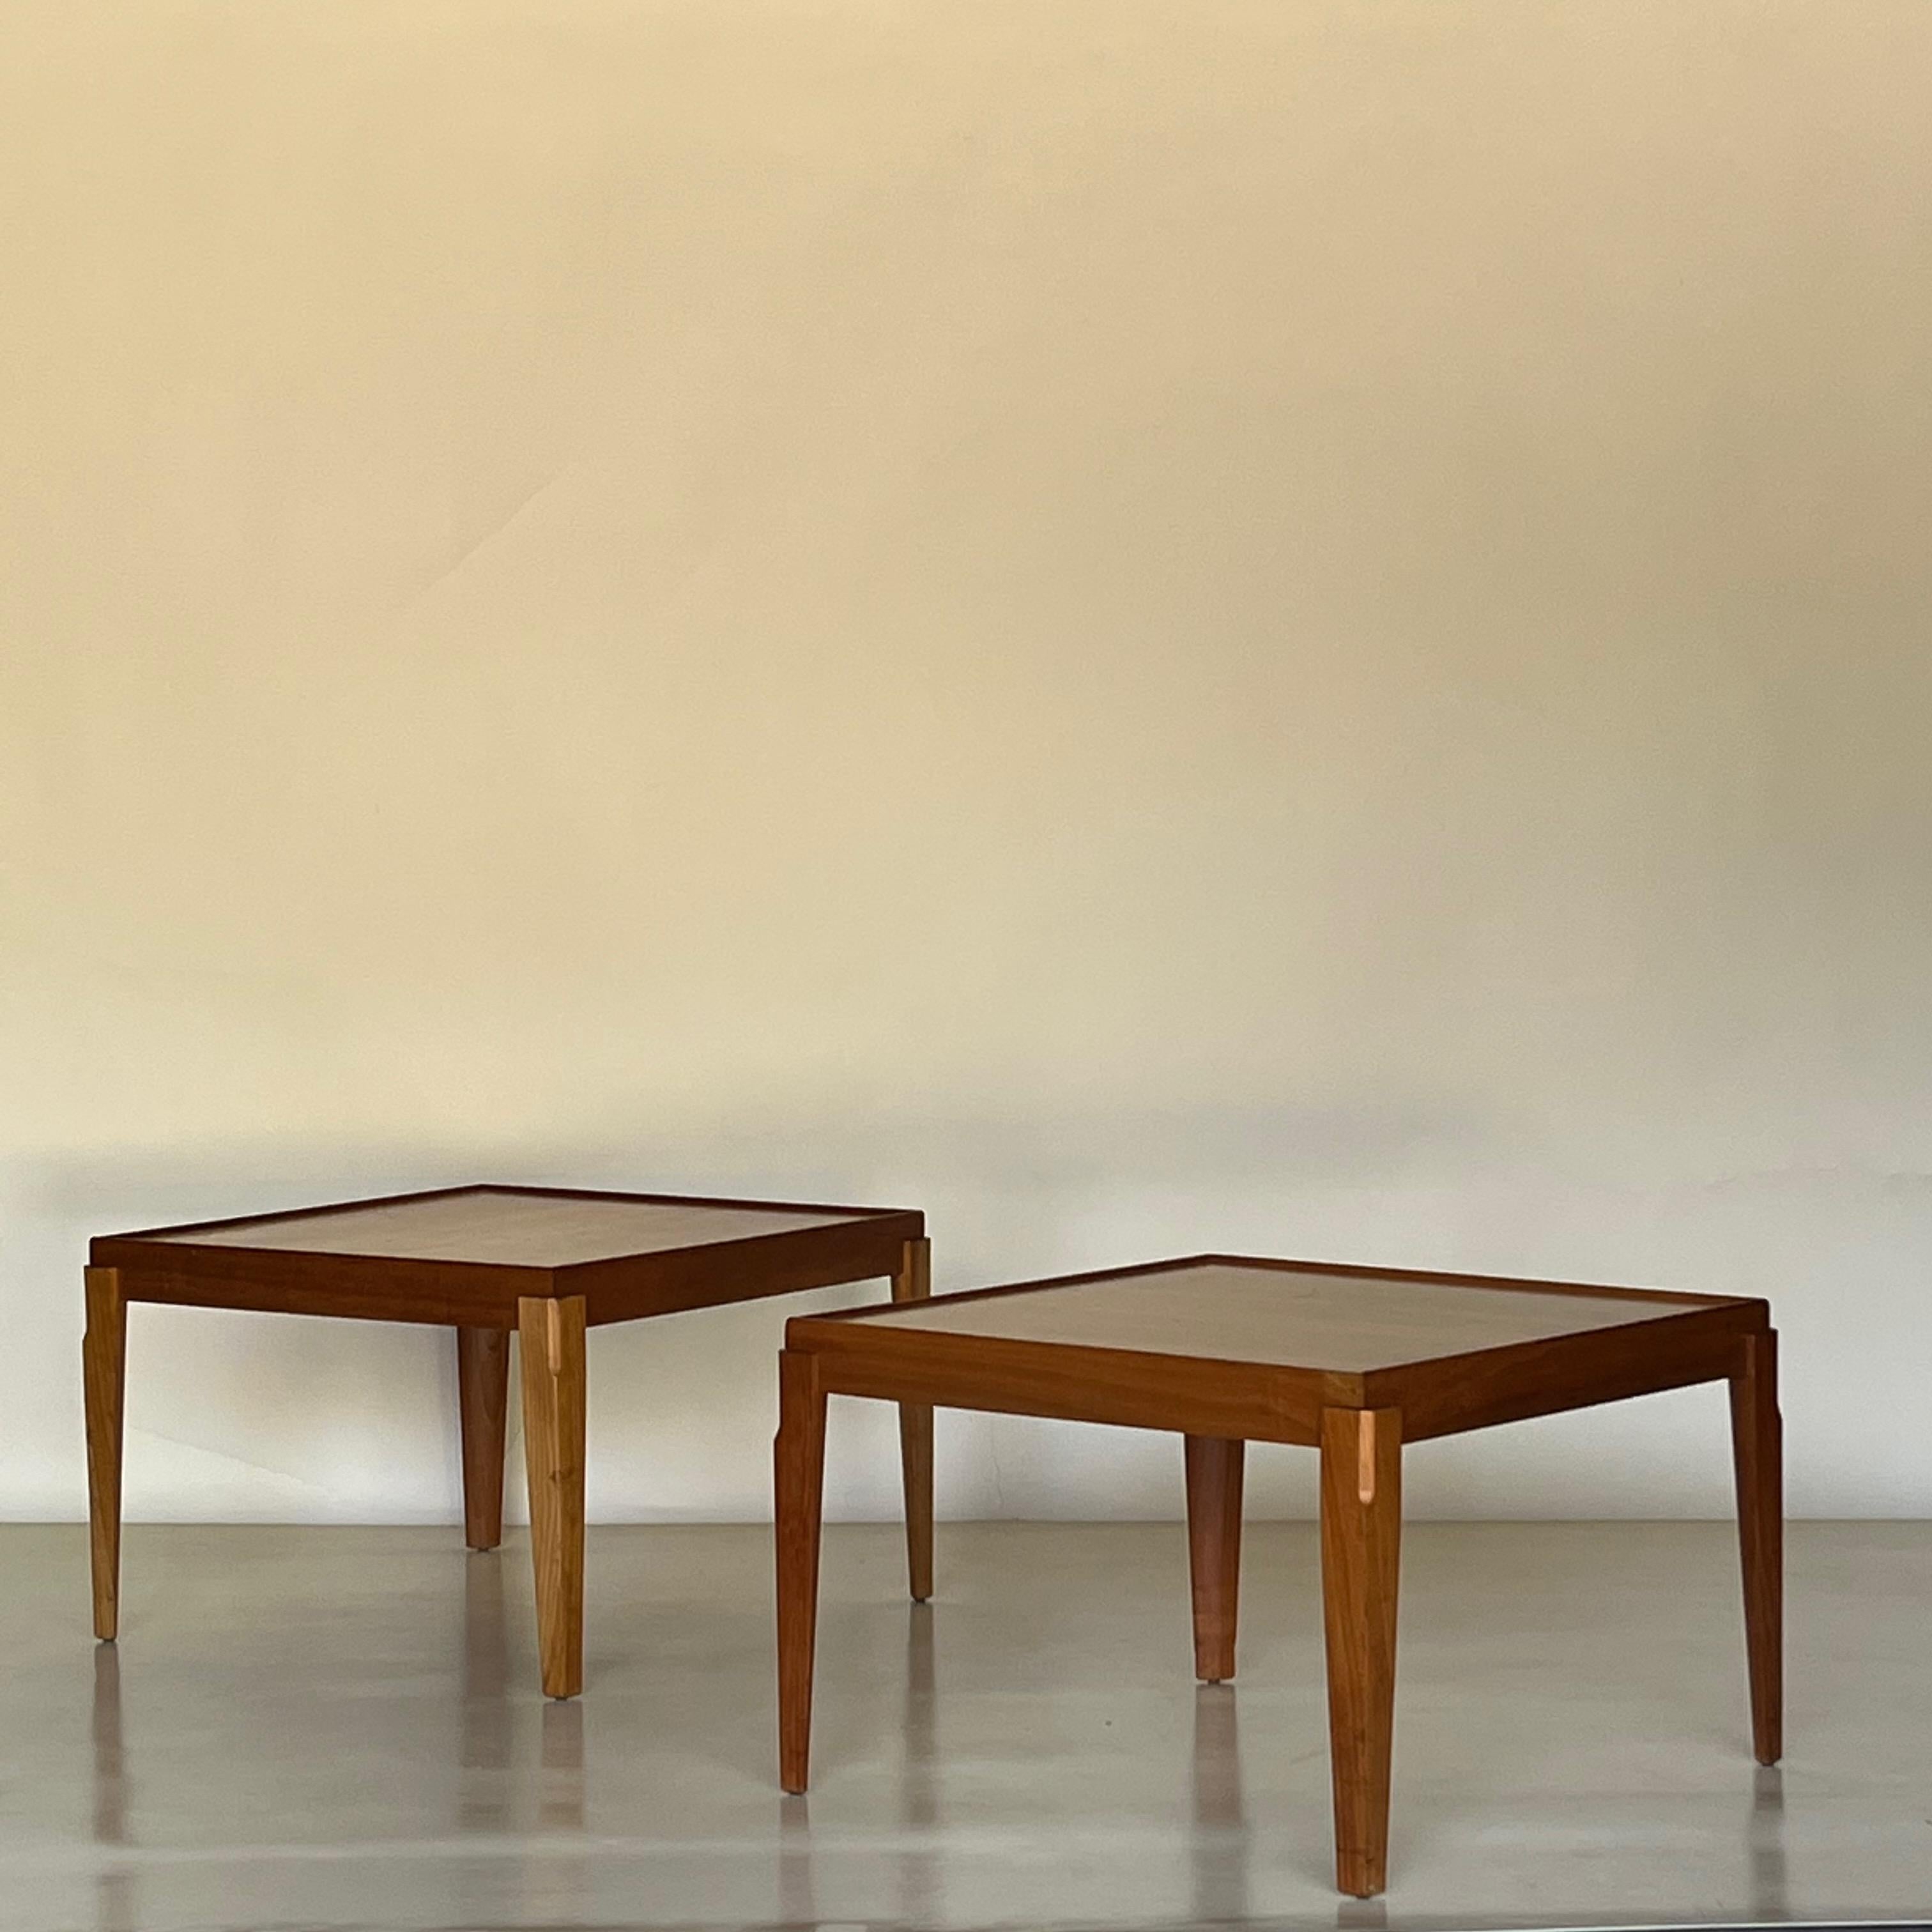 Pair of Italian blond ash end tables in the style of Gio Ponti.

Excellent proportions; beautiful wood grain.

Chic and understated.